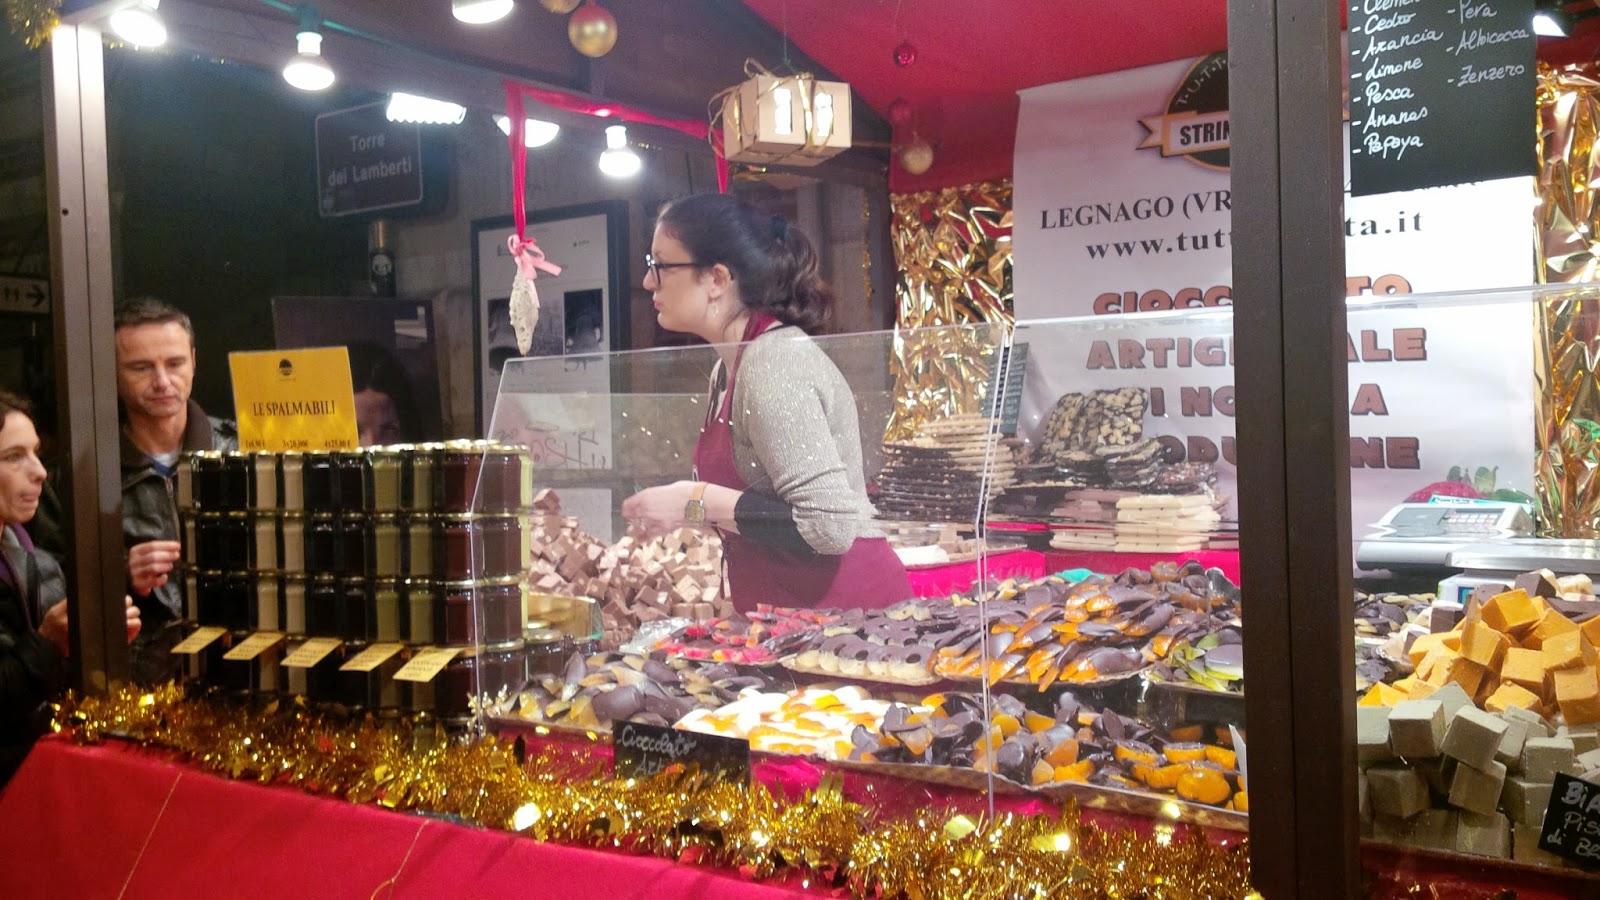 A chocolate stall at the Christmas market in Verona